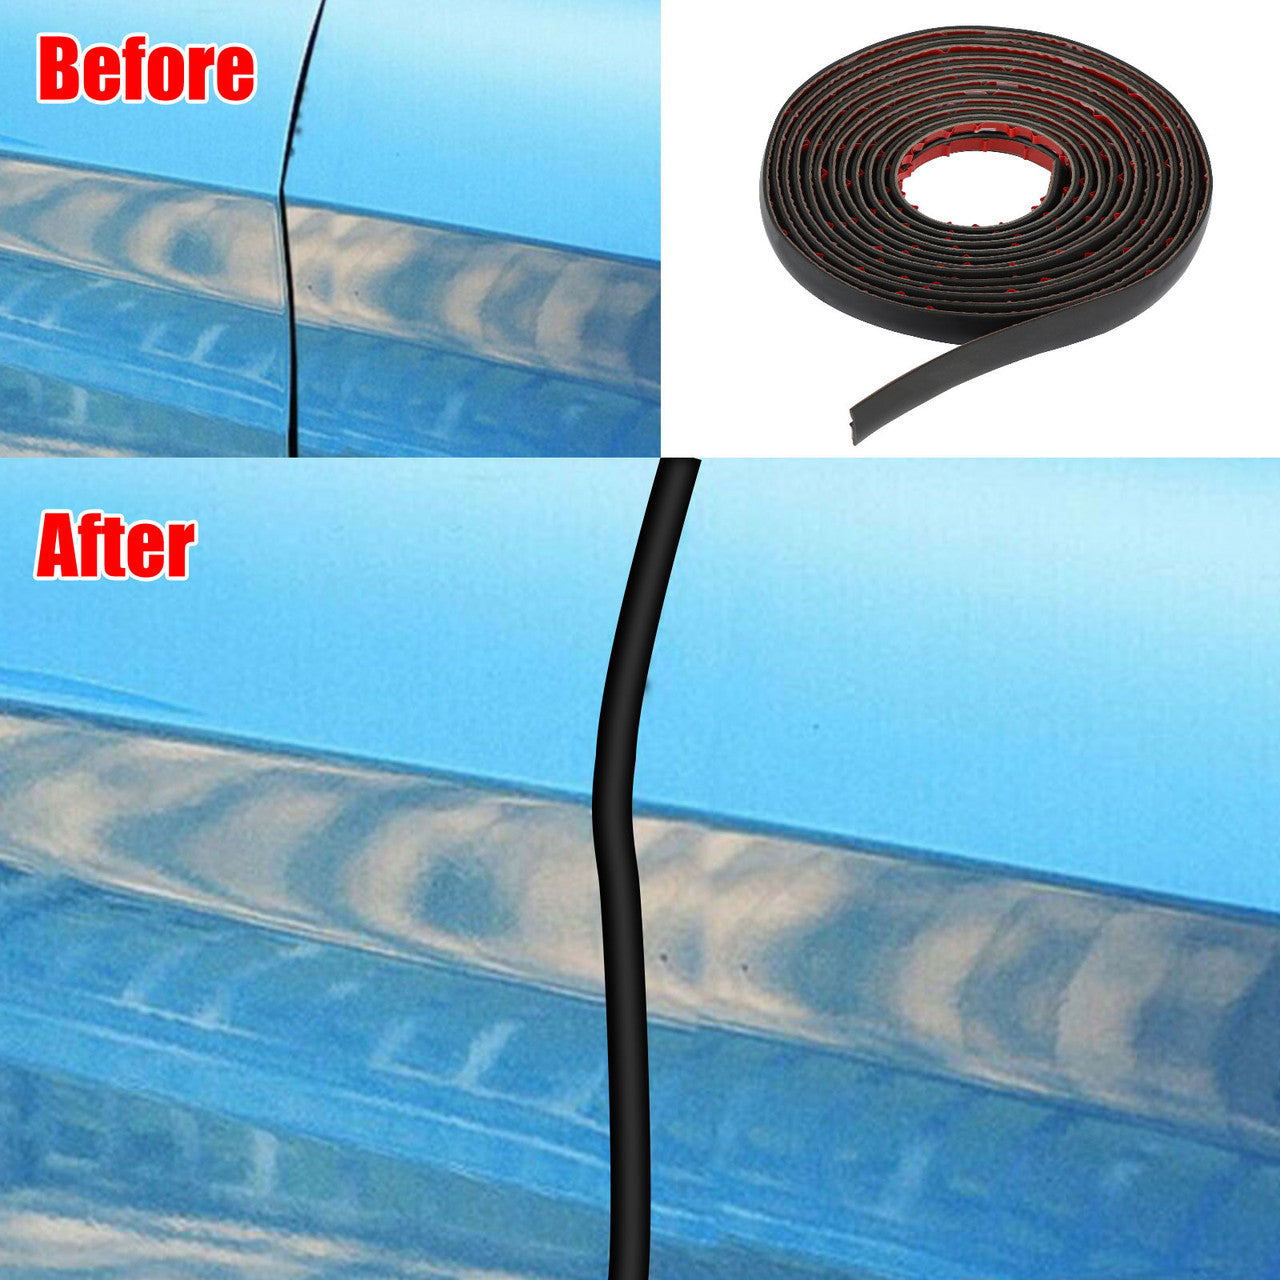 10Ft Automotive Door Sealing Strip, Car Window Weather Stripping Seal Strip, Car Front Windshield Sunroof Edge Protector Trimmed Rubber Seal, Universal Windshield Sealing Strip, Noise Insulation